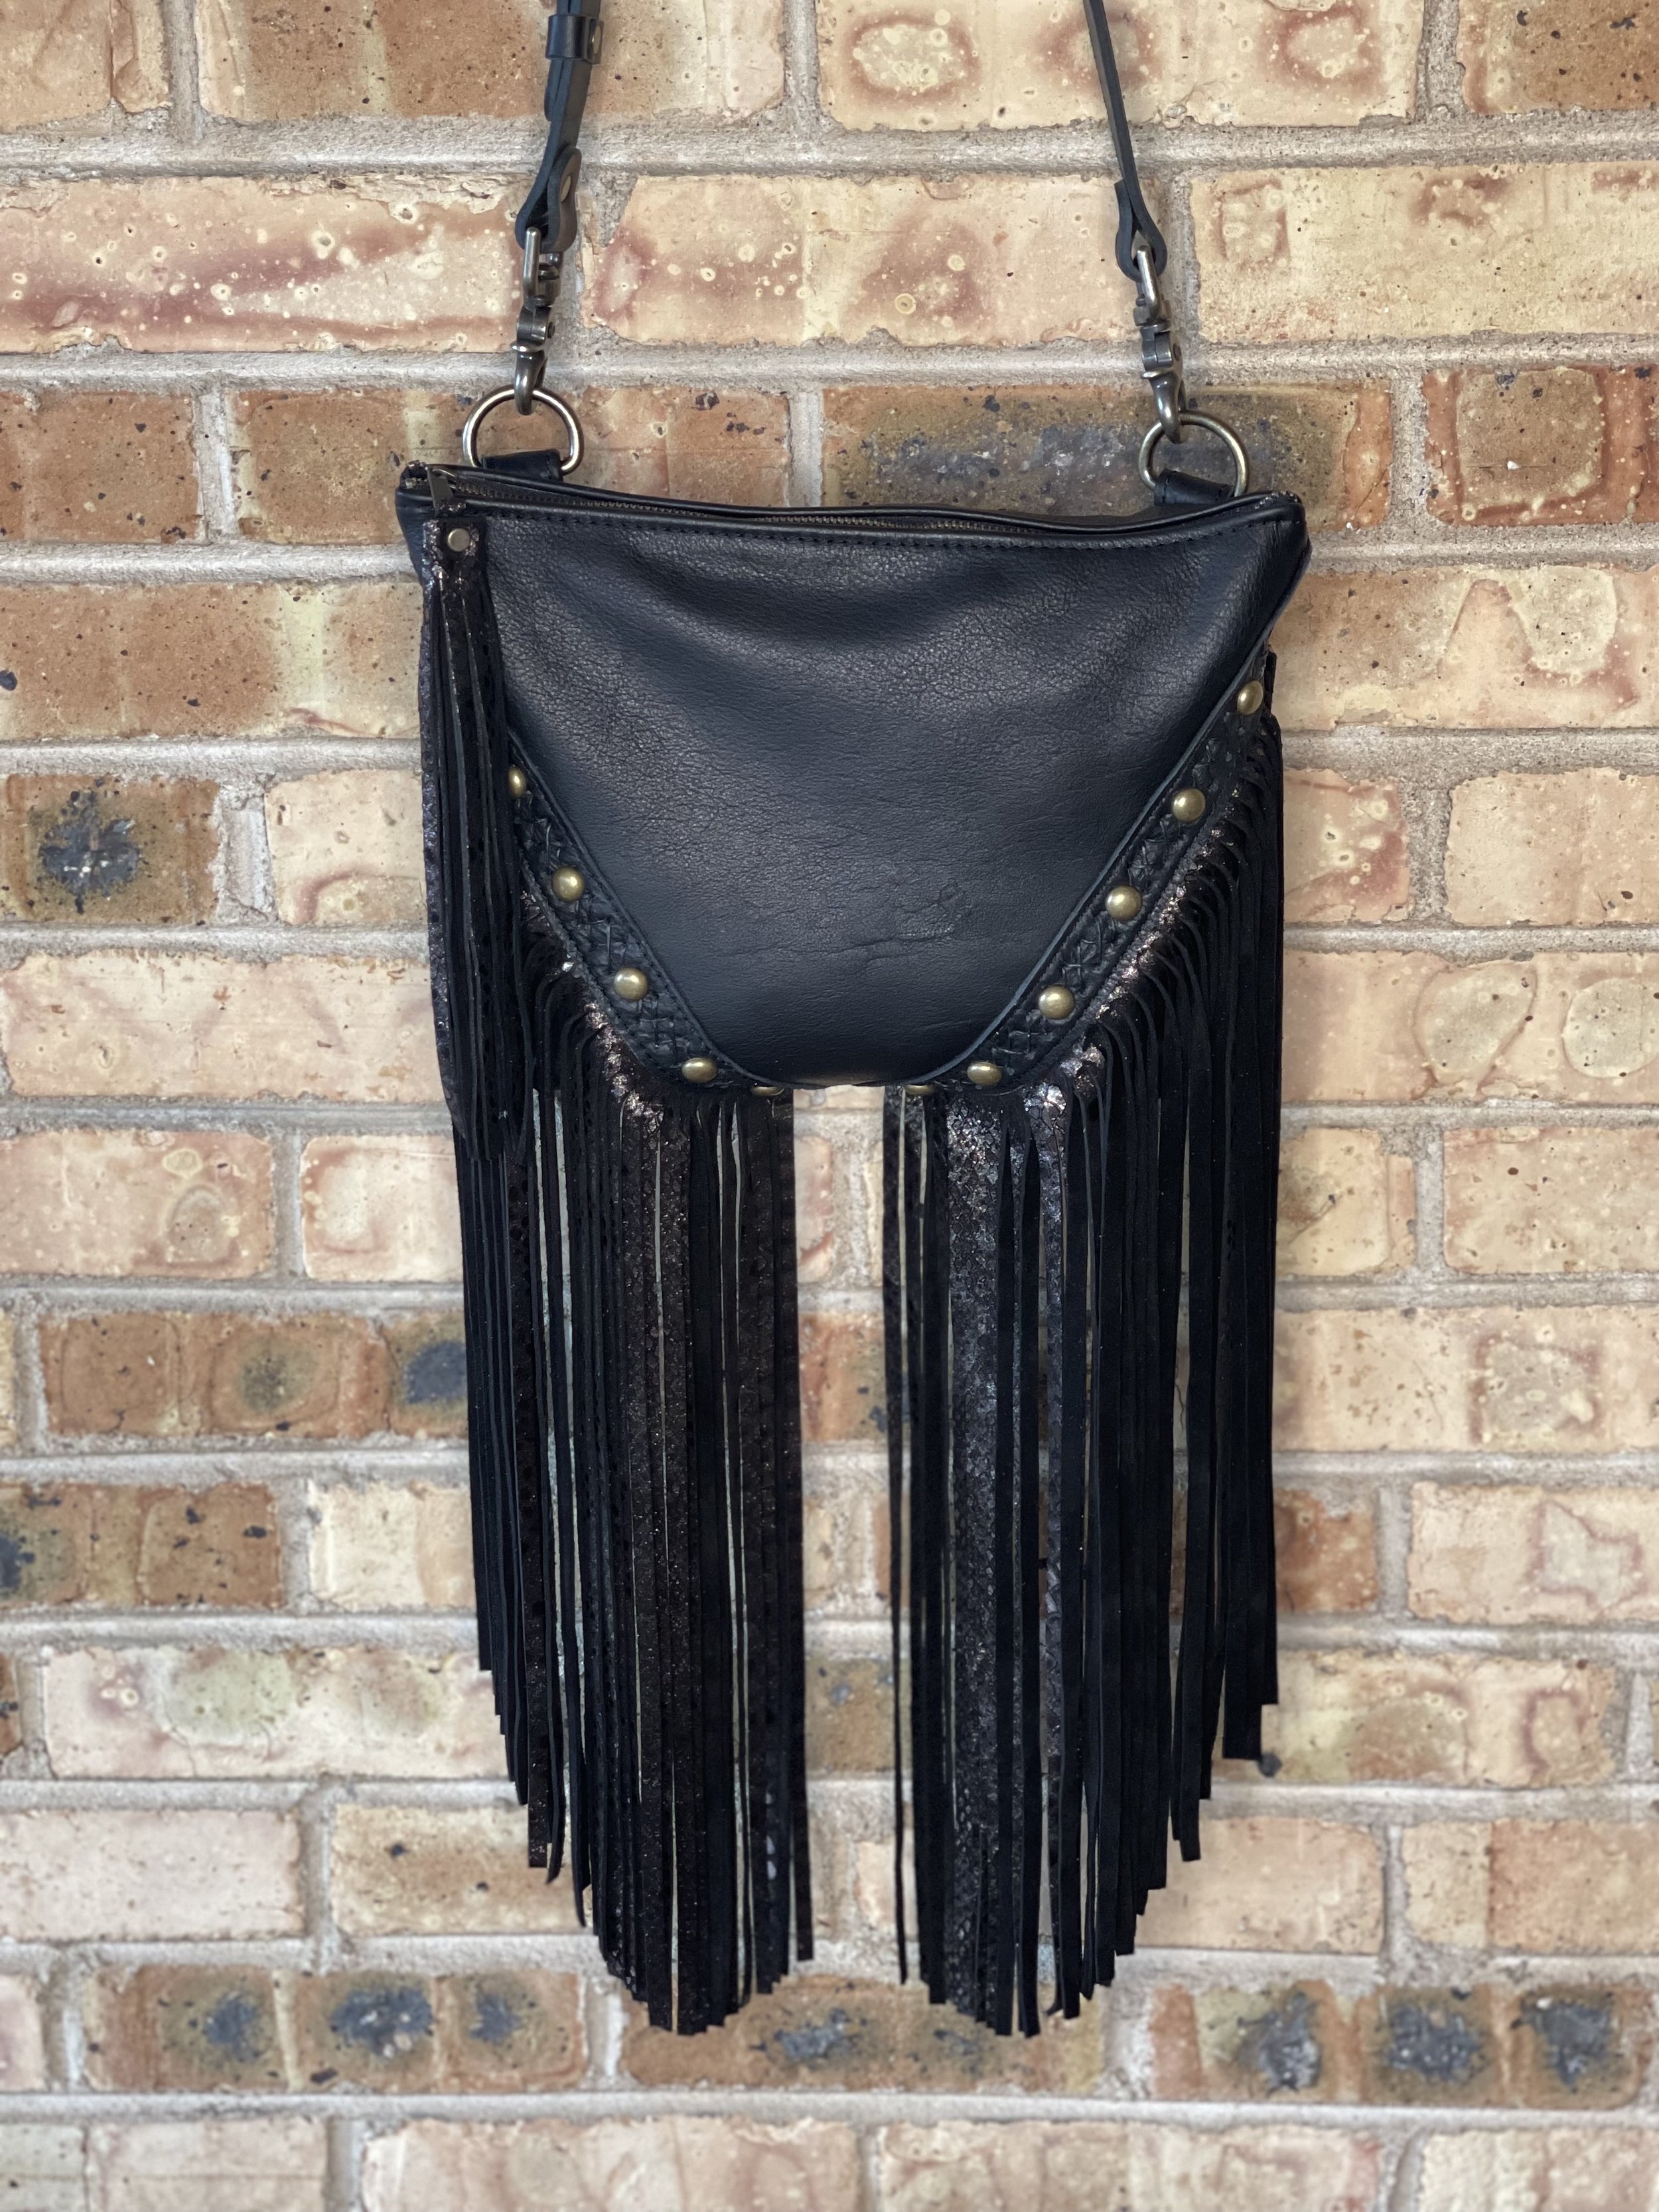 XL Radley Convertible Bag in Black Bison, *custom requested extra long* Black + Silver Python Fringe, Black Criss Cross Handstitching, and Studs